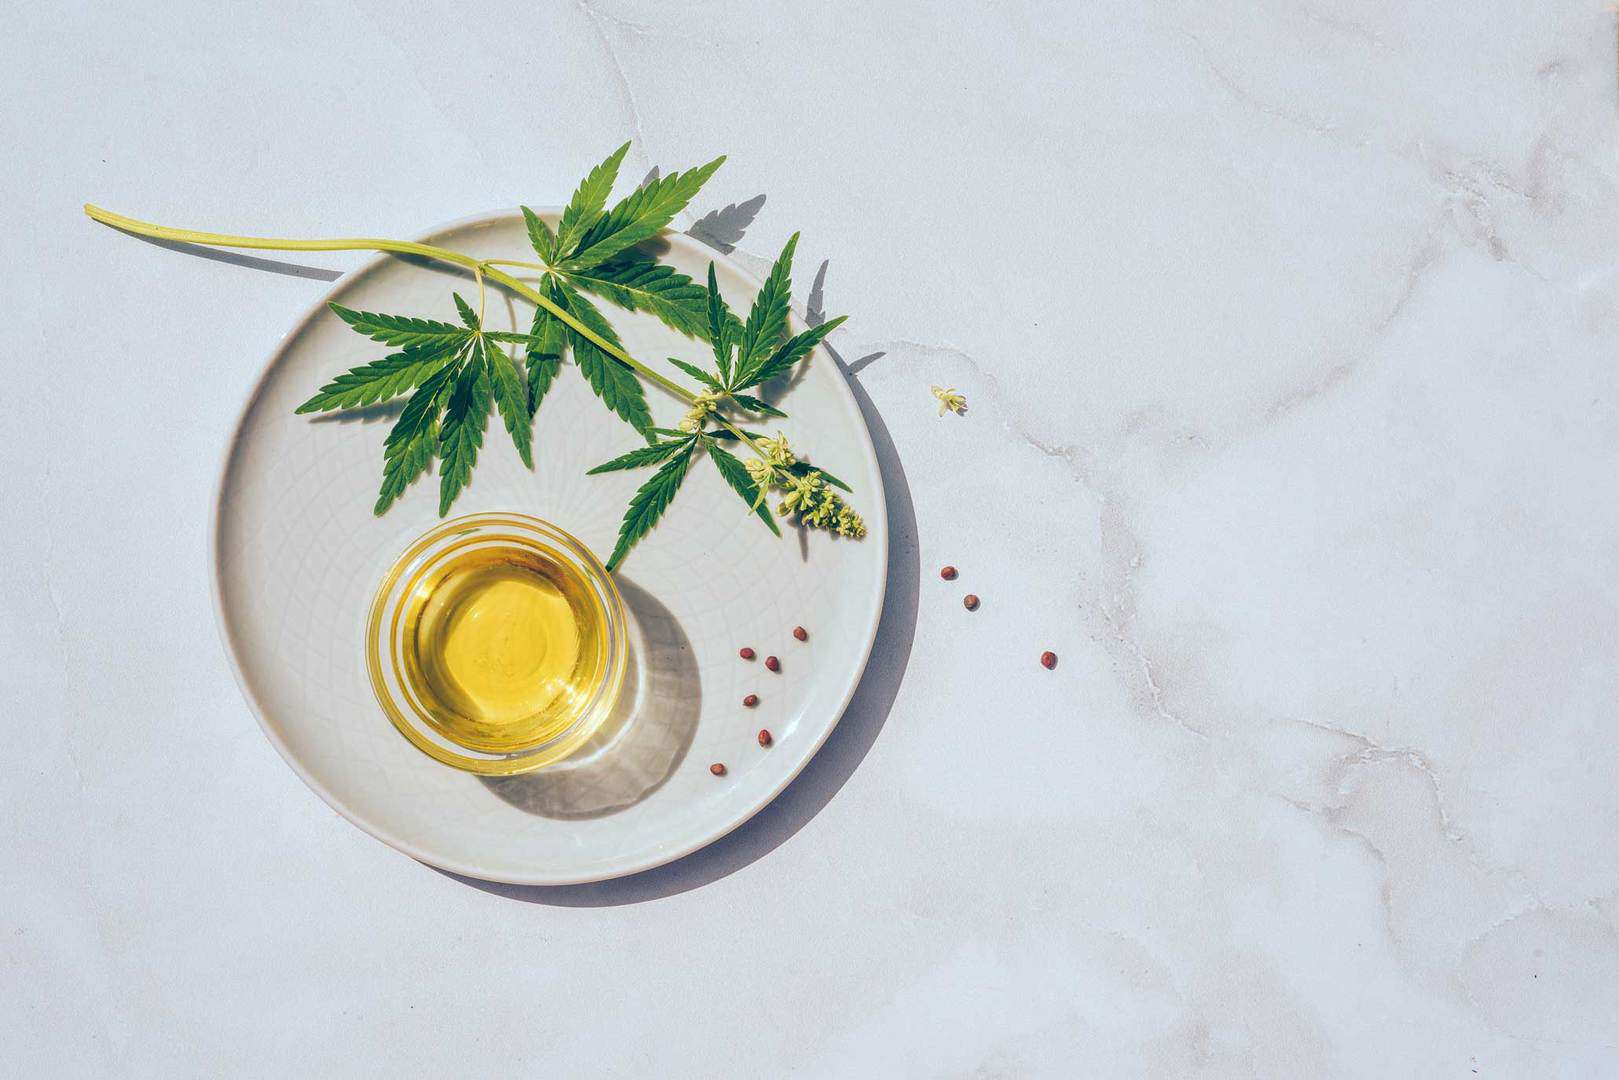 5 Top Tips To Help Your Doctor Prescribe CBD Oil in NZ